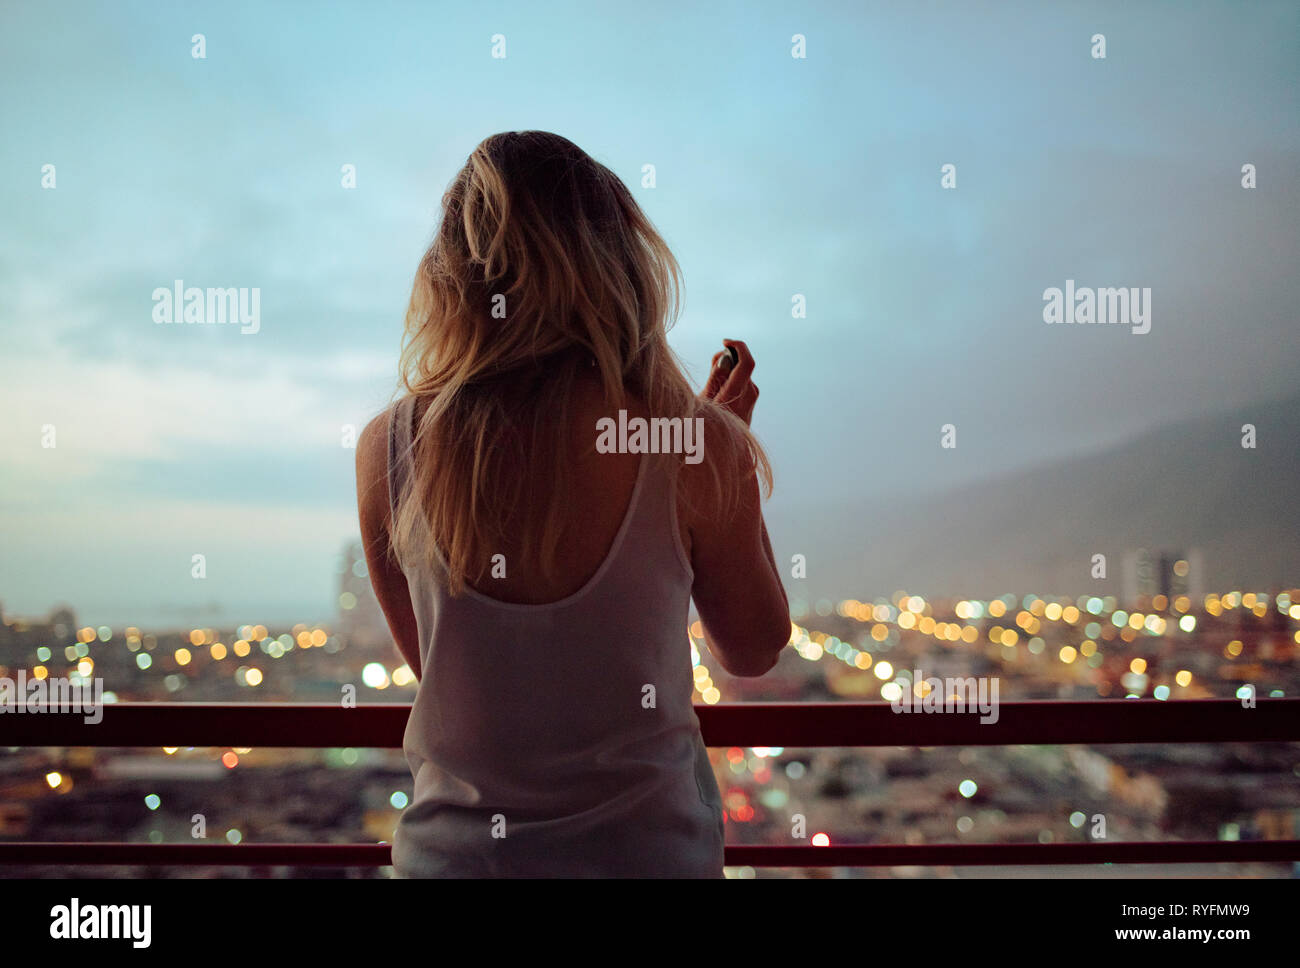 Rear view of disheveled woman looking at view. Switching off / shutting off after a hard day. Lifestyle / city life / mindfulness concept. May 2018 Stock Photo